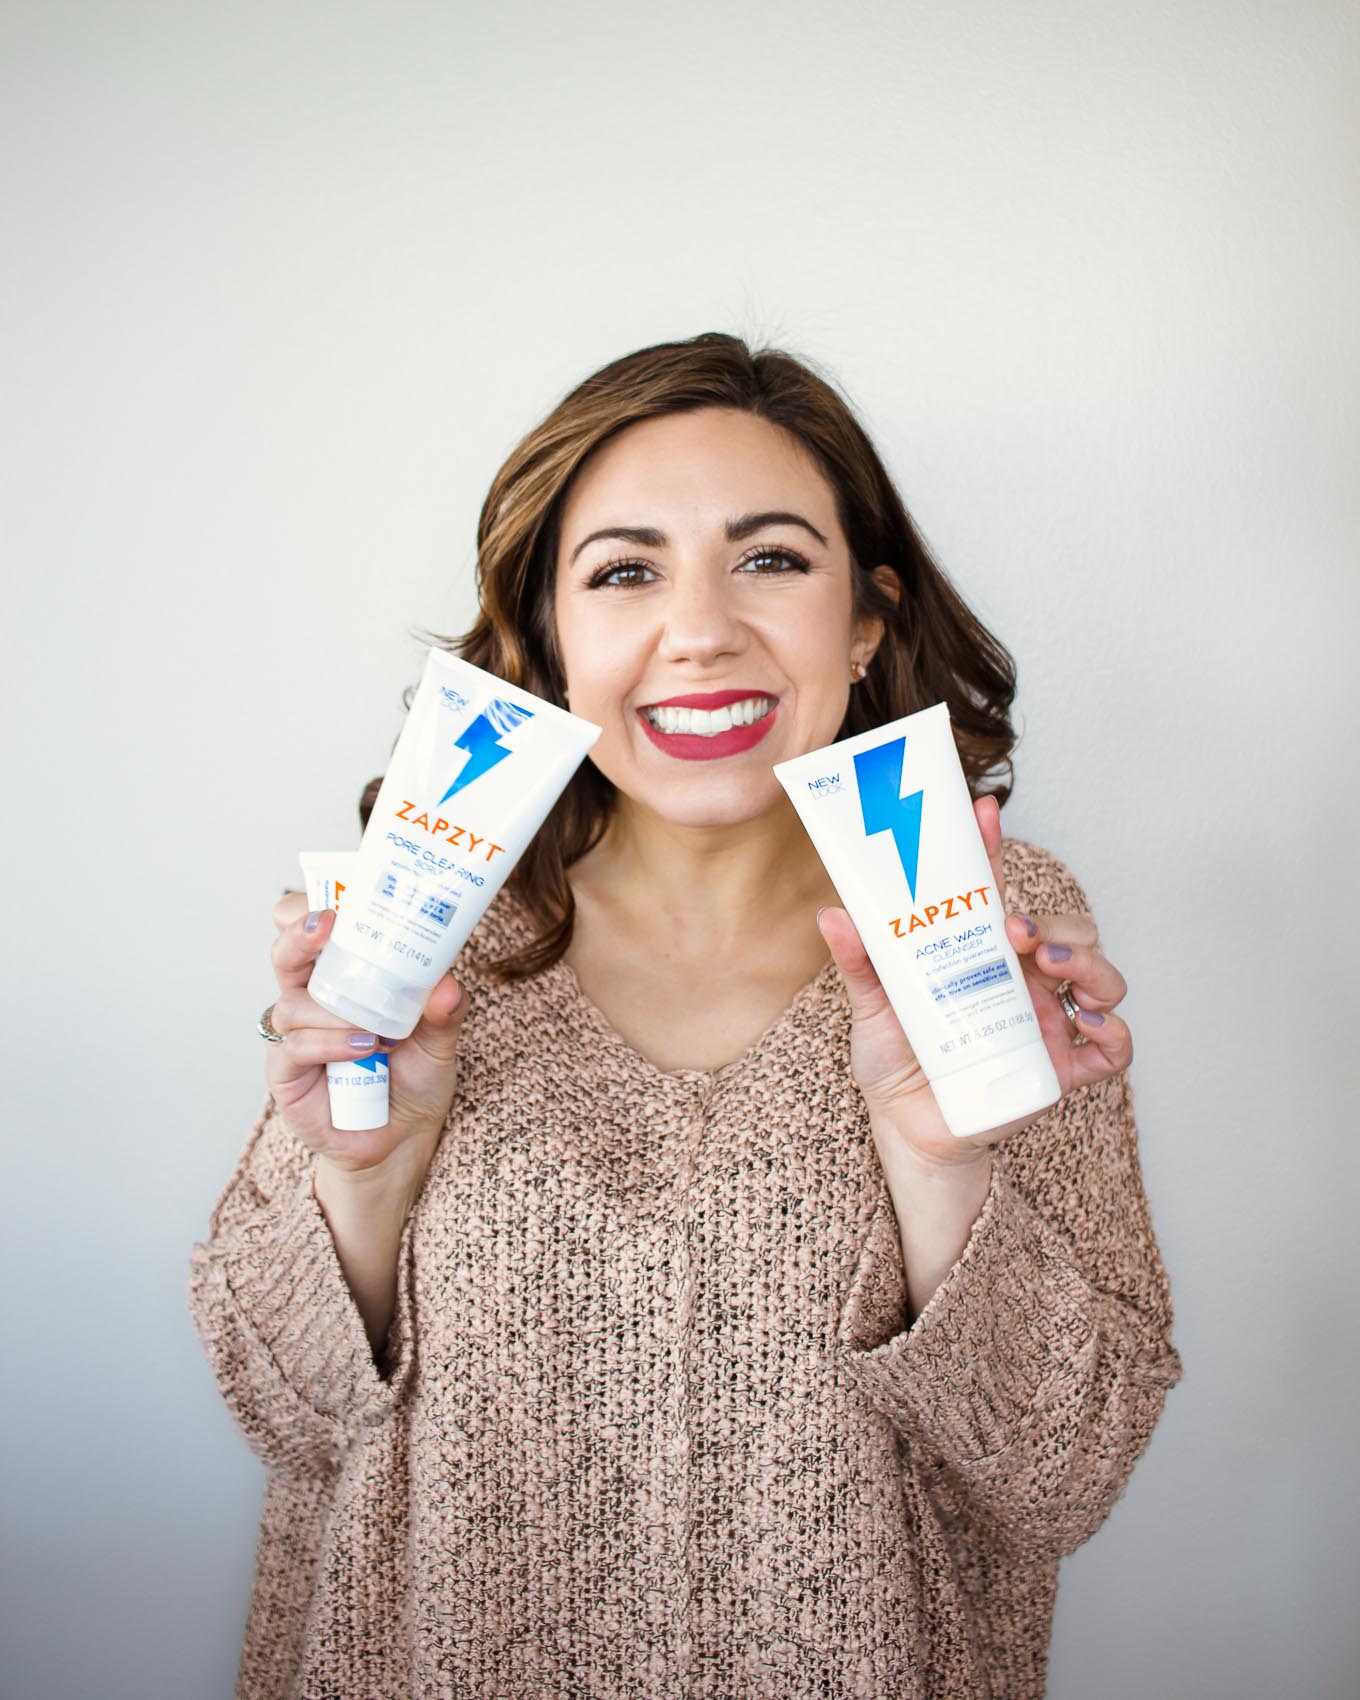 Lifestyle blogger Roxanne of Glass of Glam's top skin emergency products with Zapzyt - Top 6 Skin Emergency Products by popular Chicago style blogger Glass of Glam